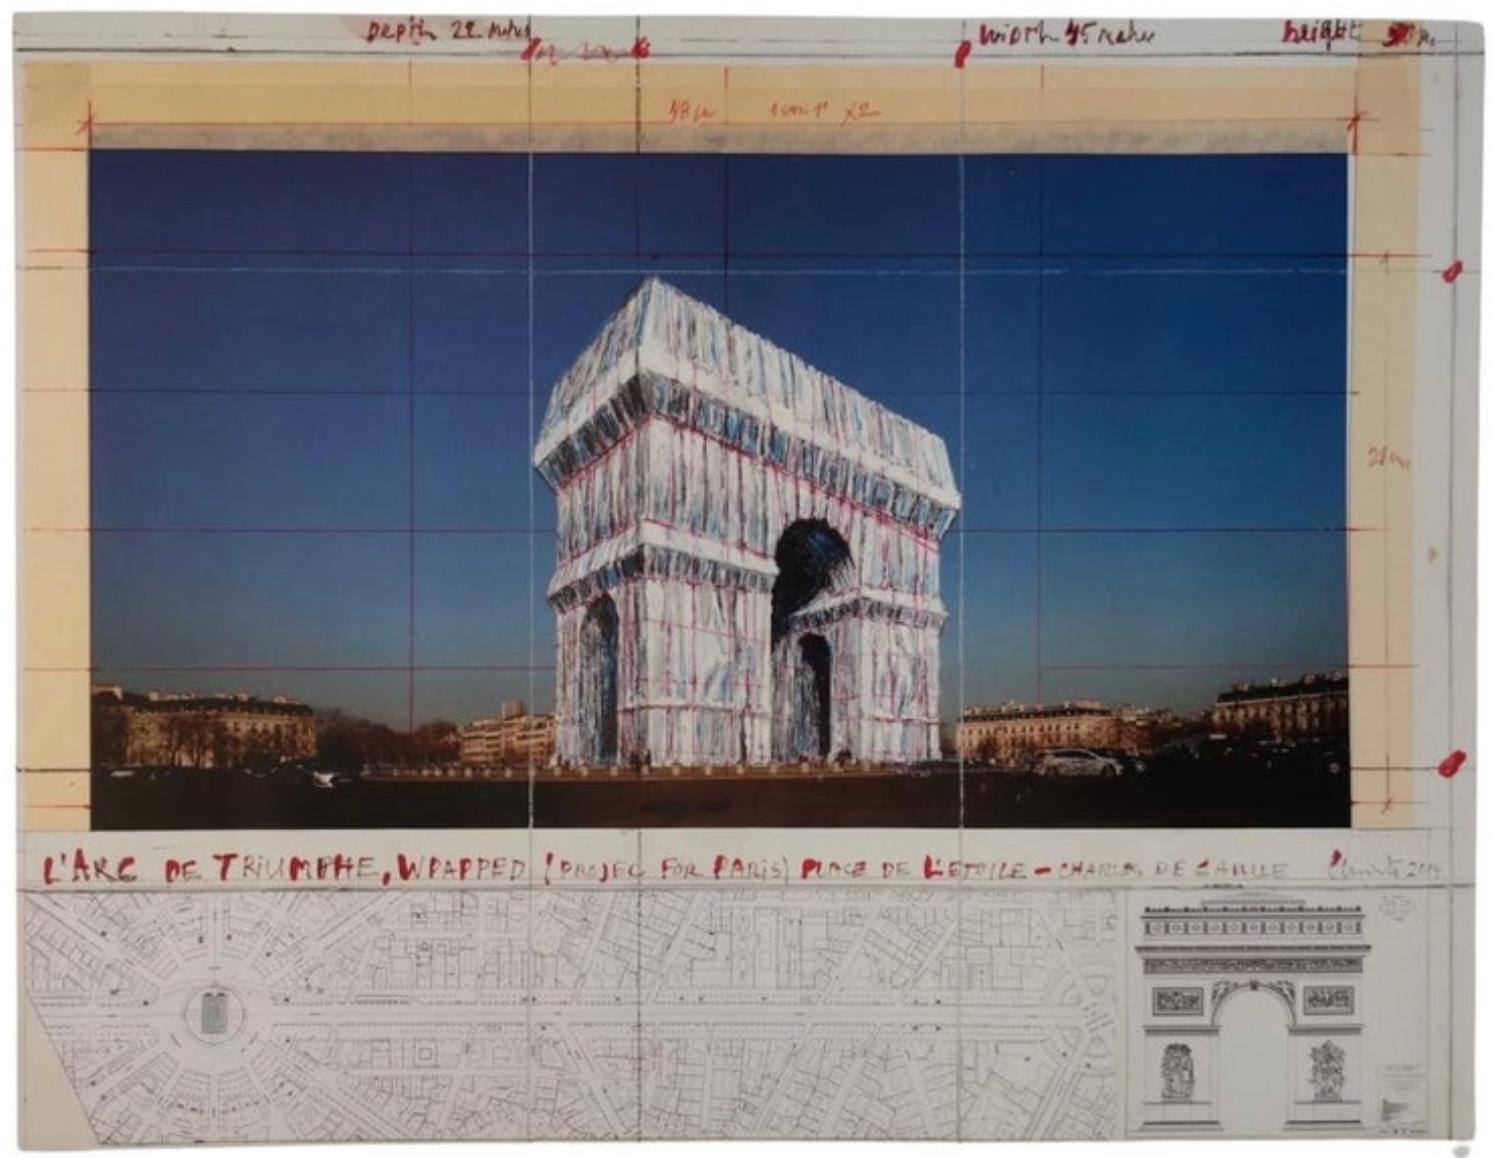 Print of L'Arc de Triomphe wrapped project signed by the artist Christo Javacheff .
Sheet: 62 x 71 cm
USA 2019.